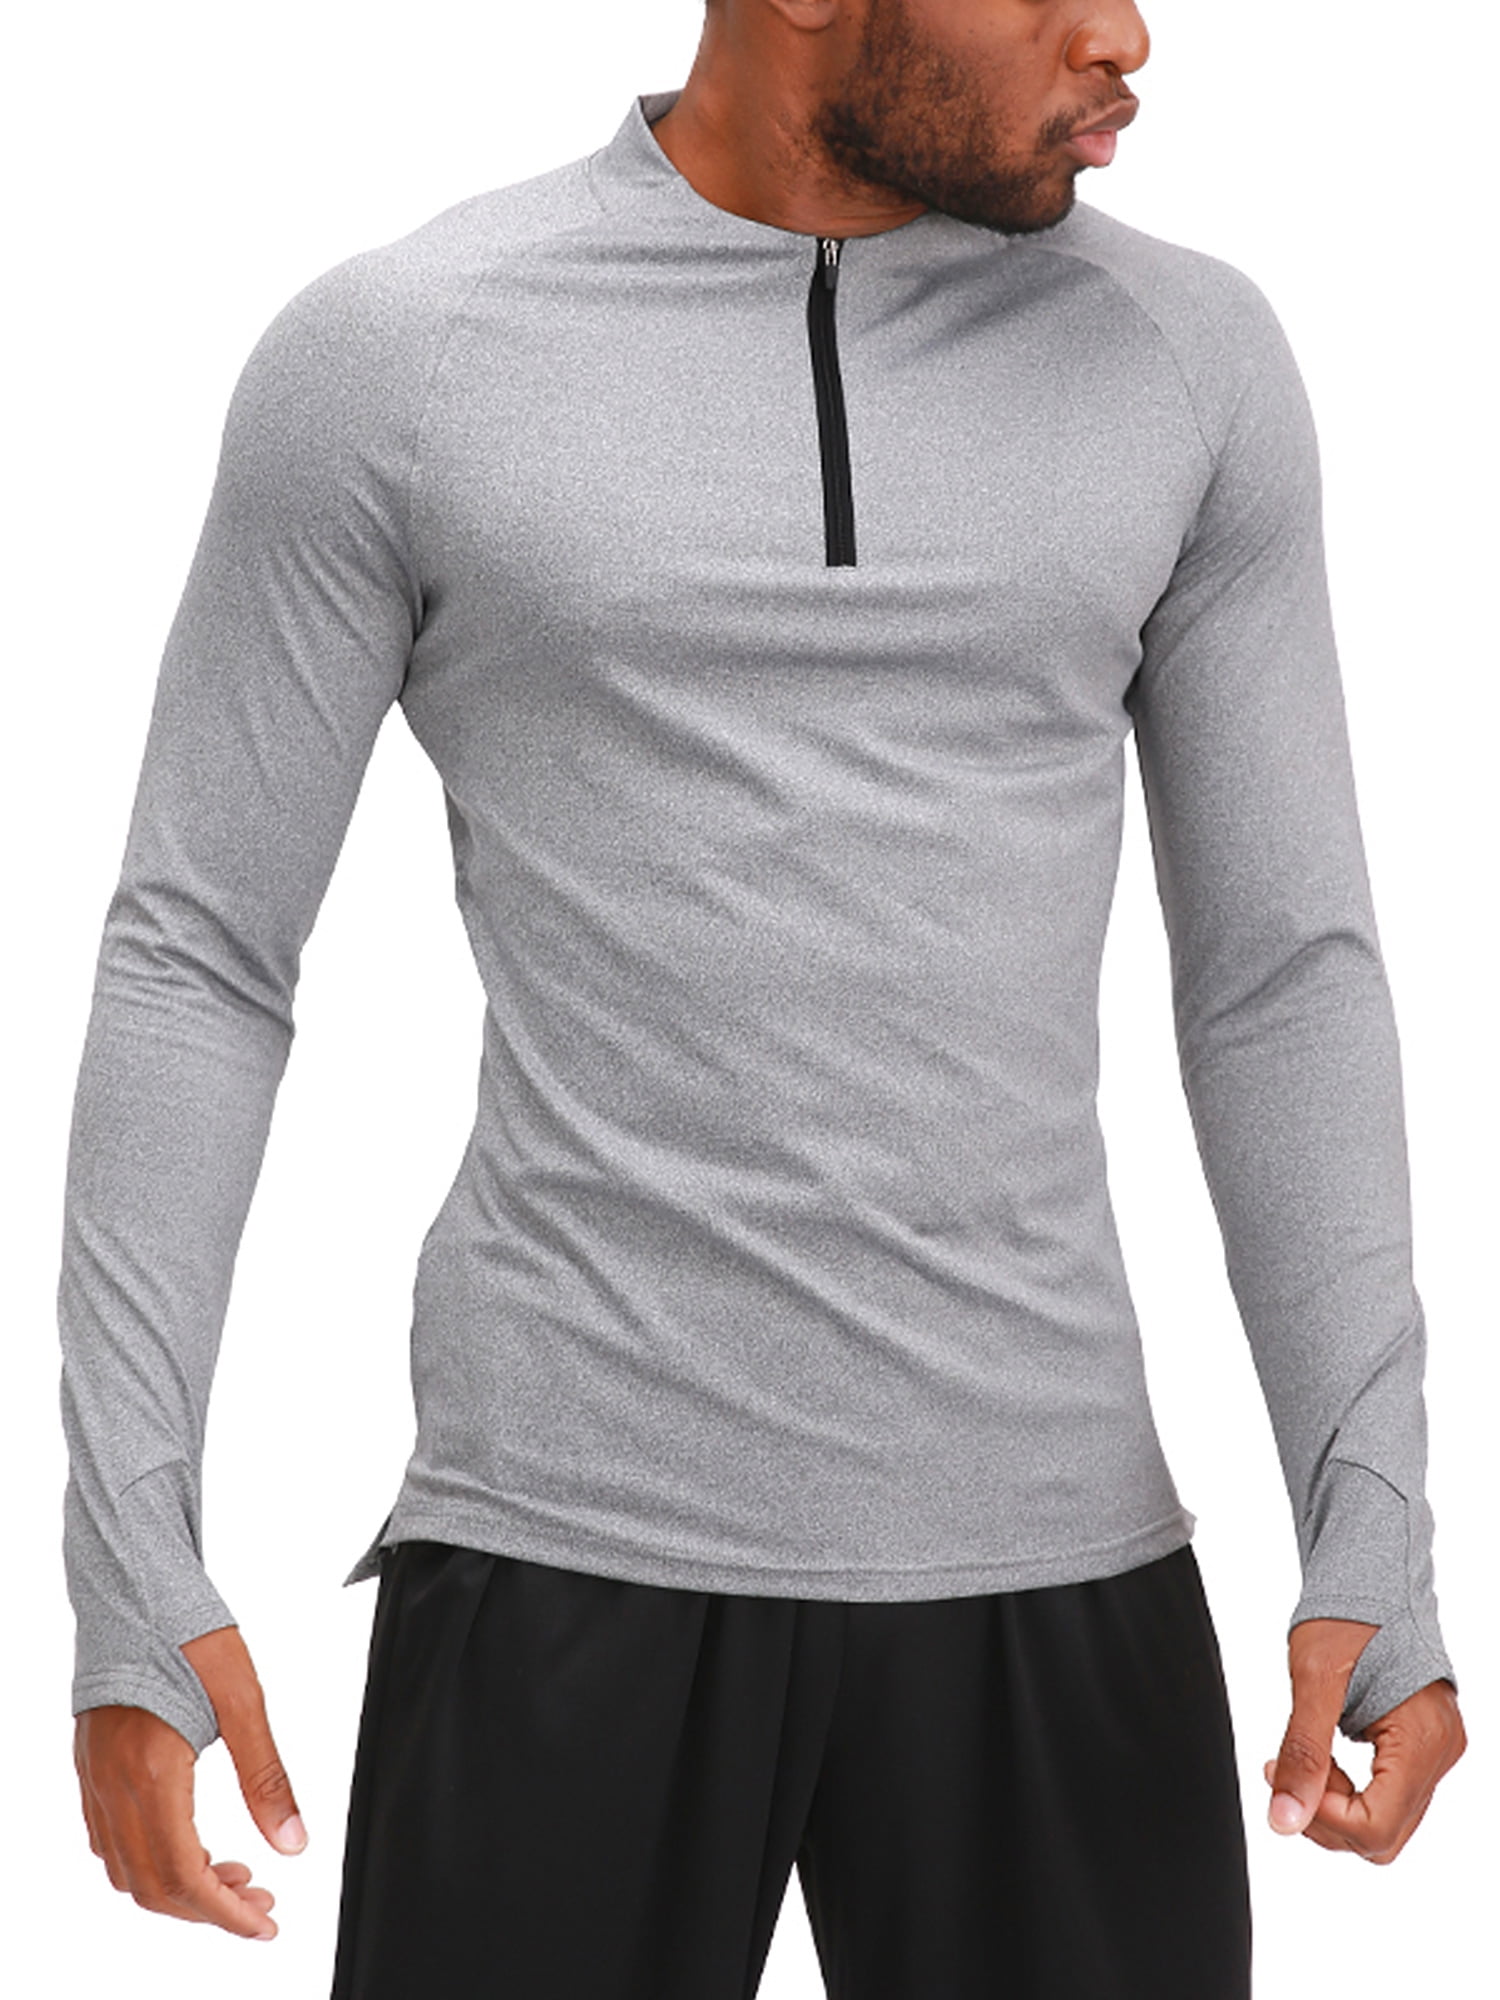 PKAWAY Mens Slim Fit Long Sleeve Camo Compression Shirt for Running Quick Dry